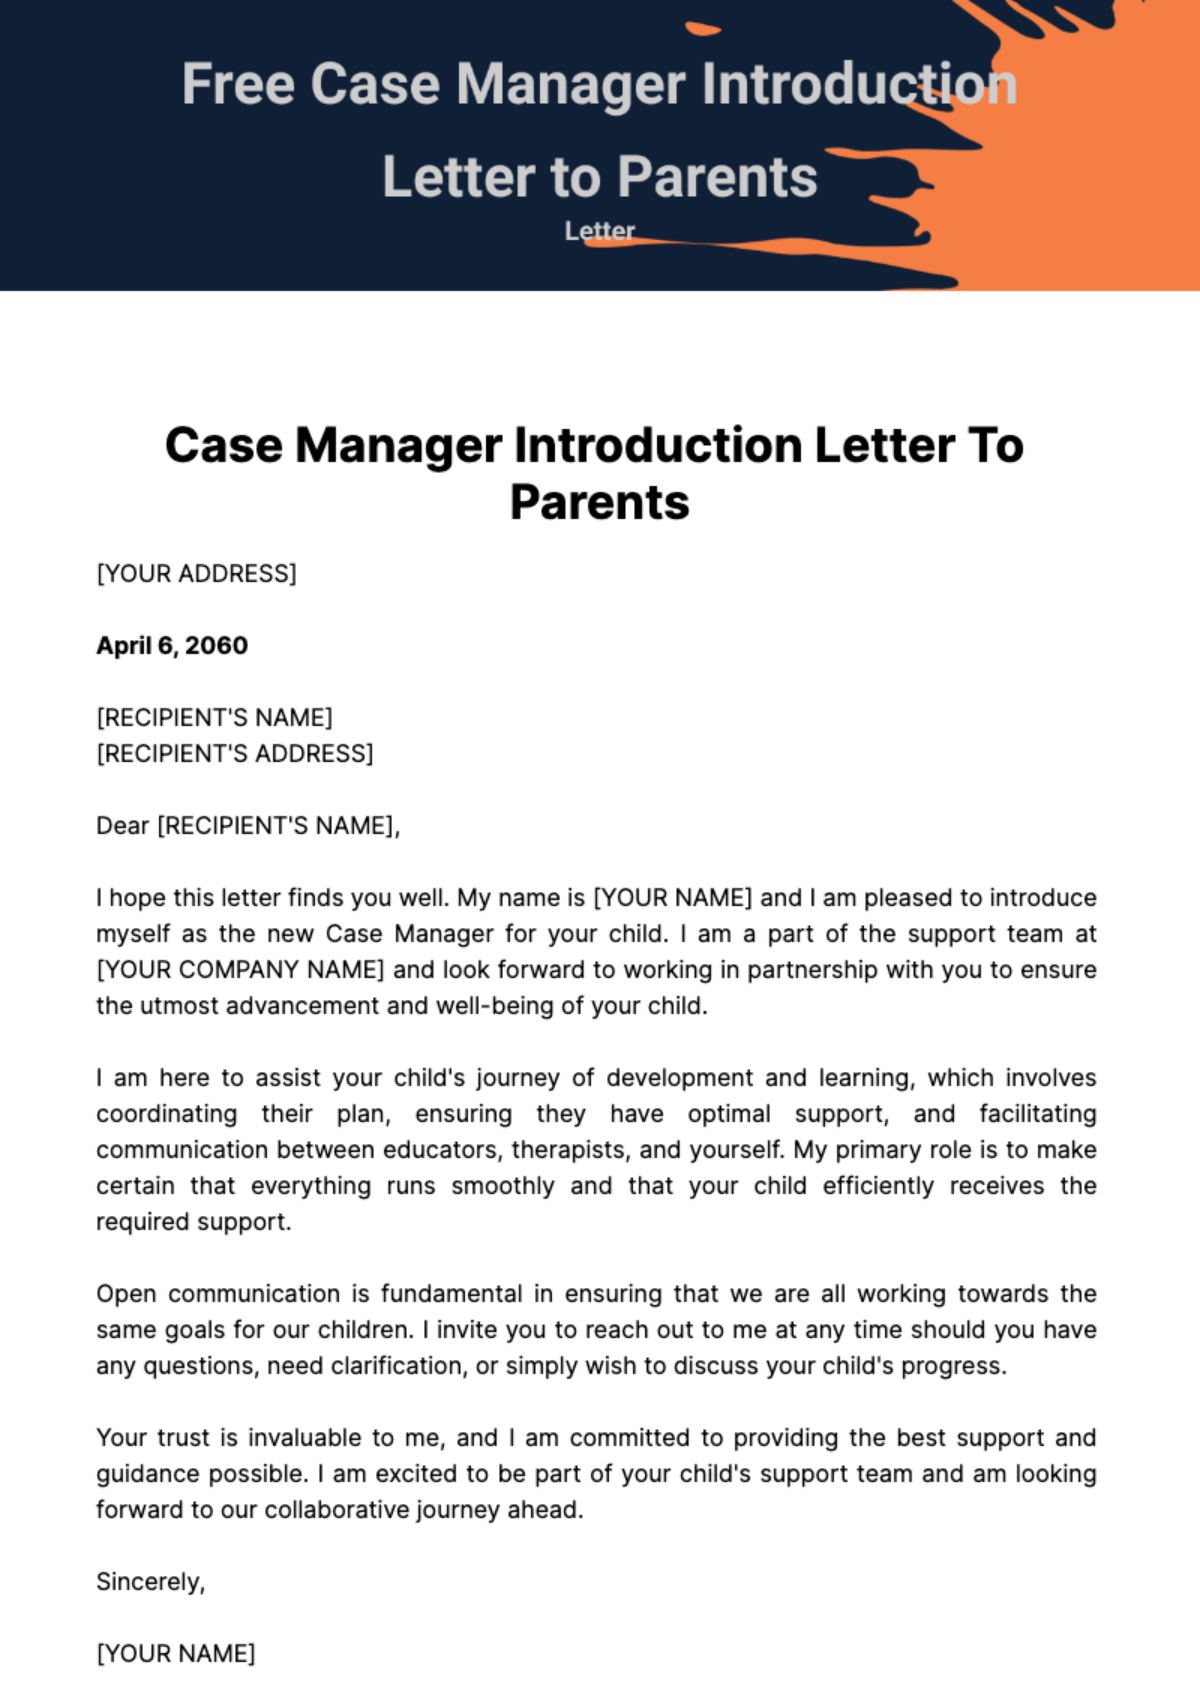 Free Case Manager Introduction Letter to Parents Template